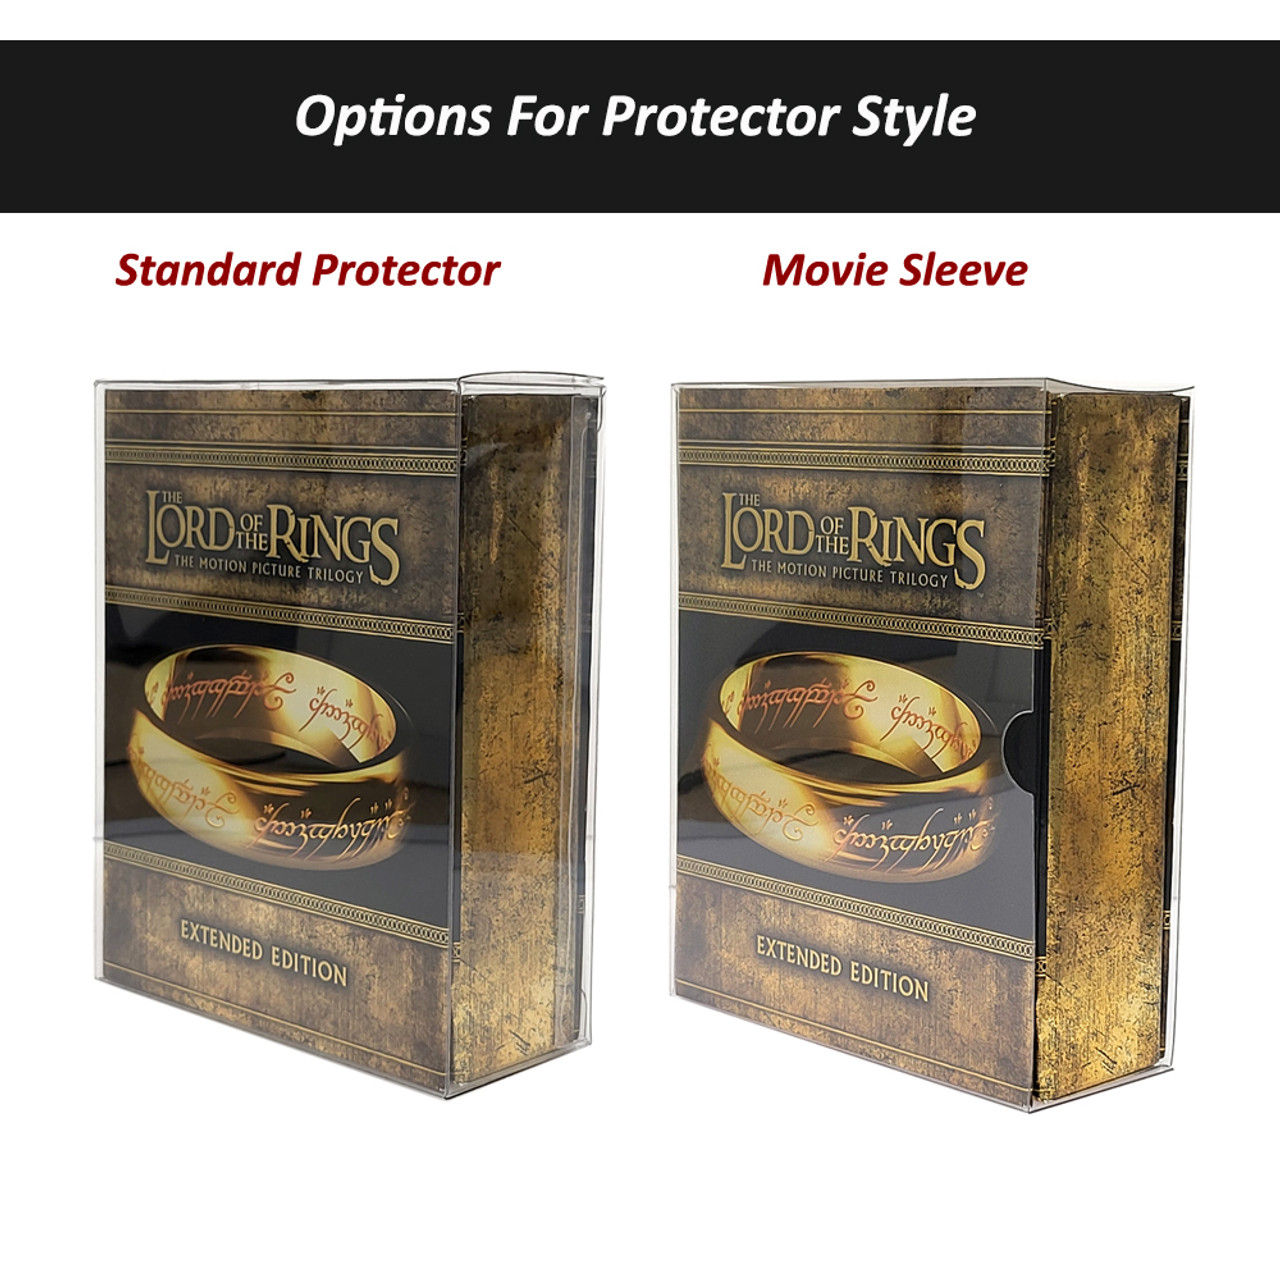 Protector For Dawn of the Dead Standard Box Set